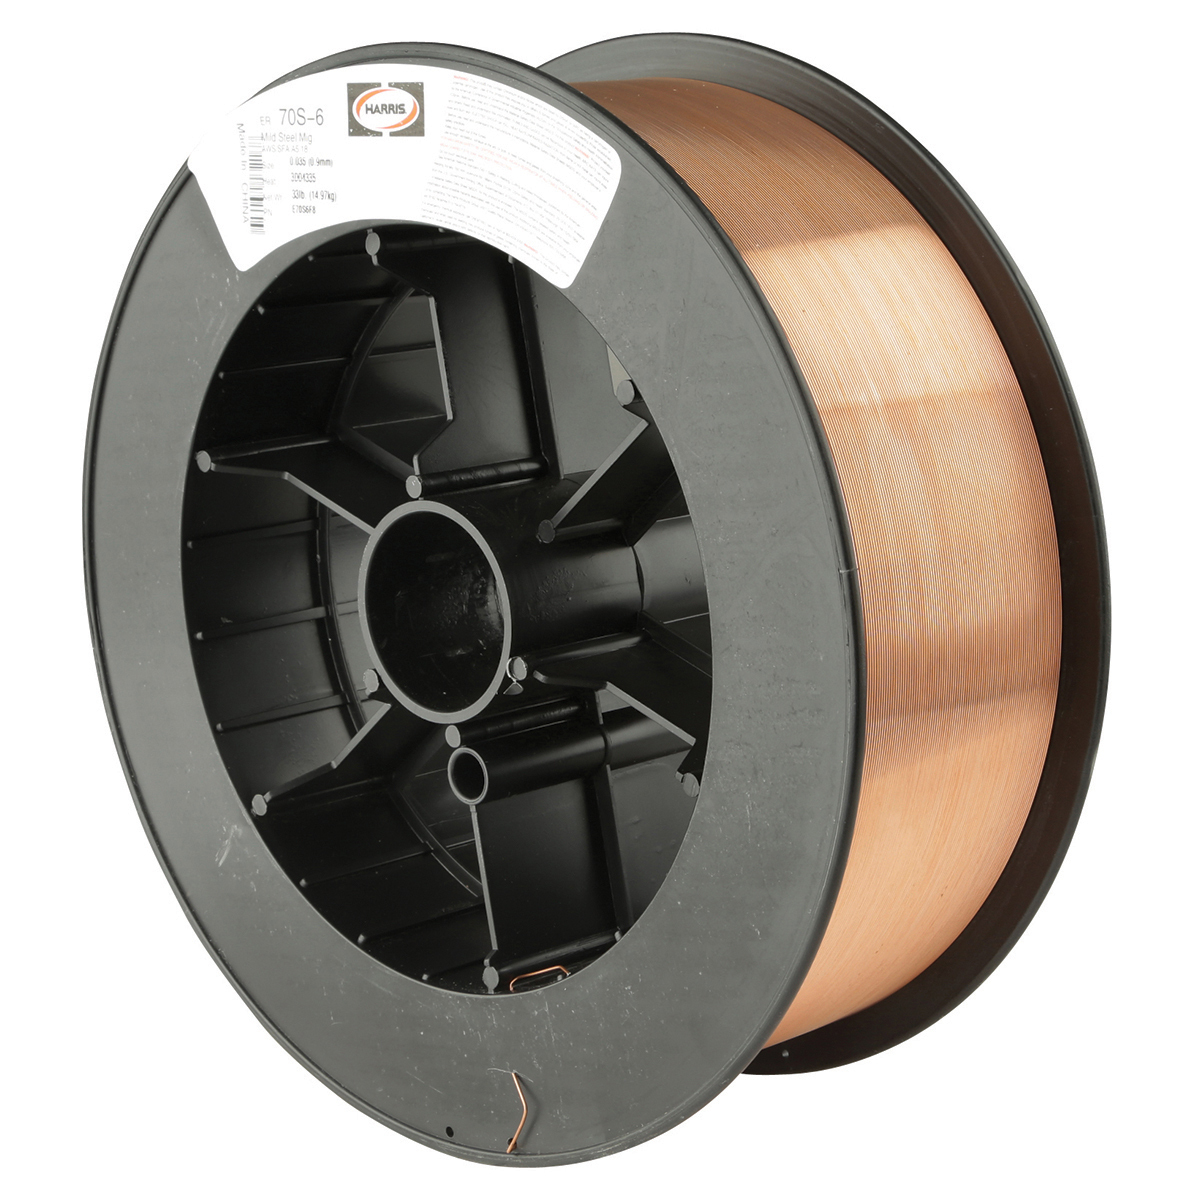 What Is The Purpose Of A Welding Wire Spool?